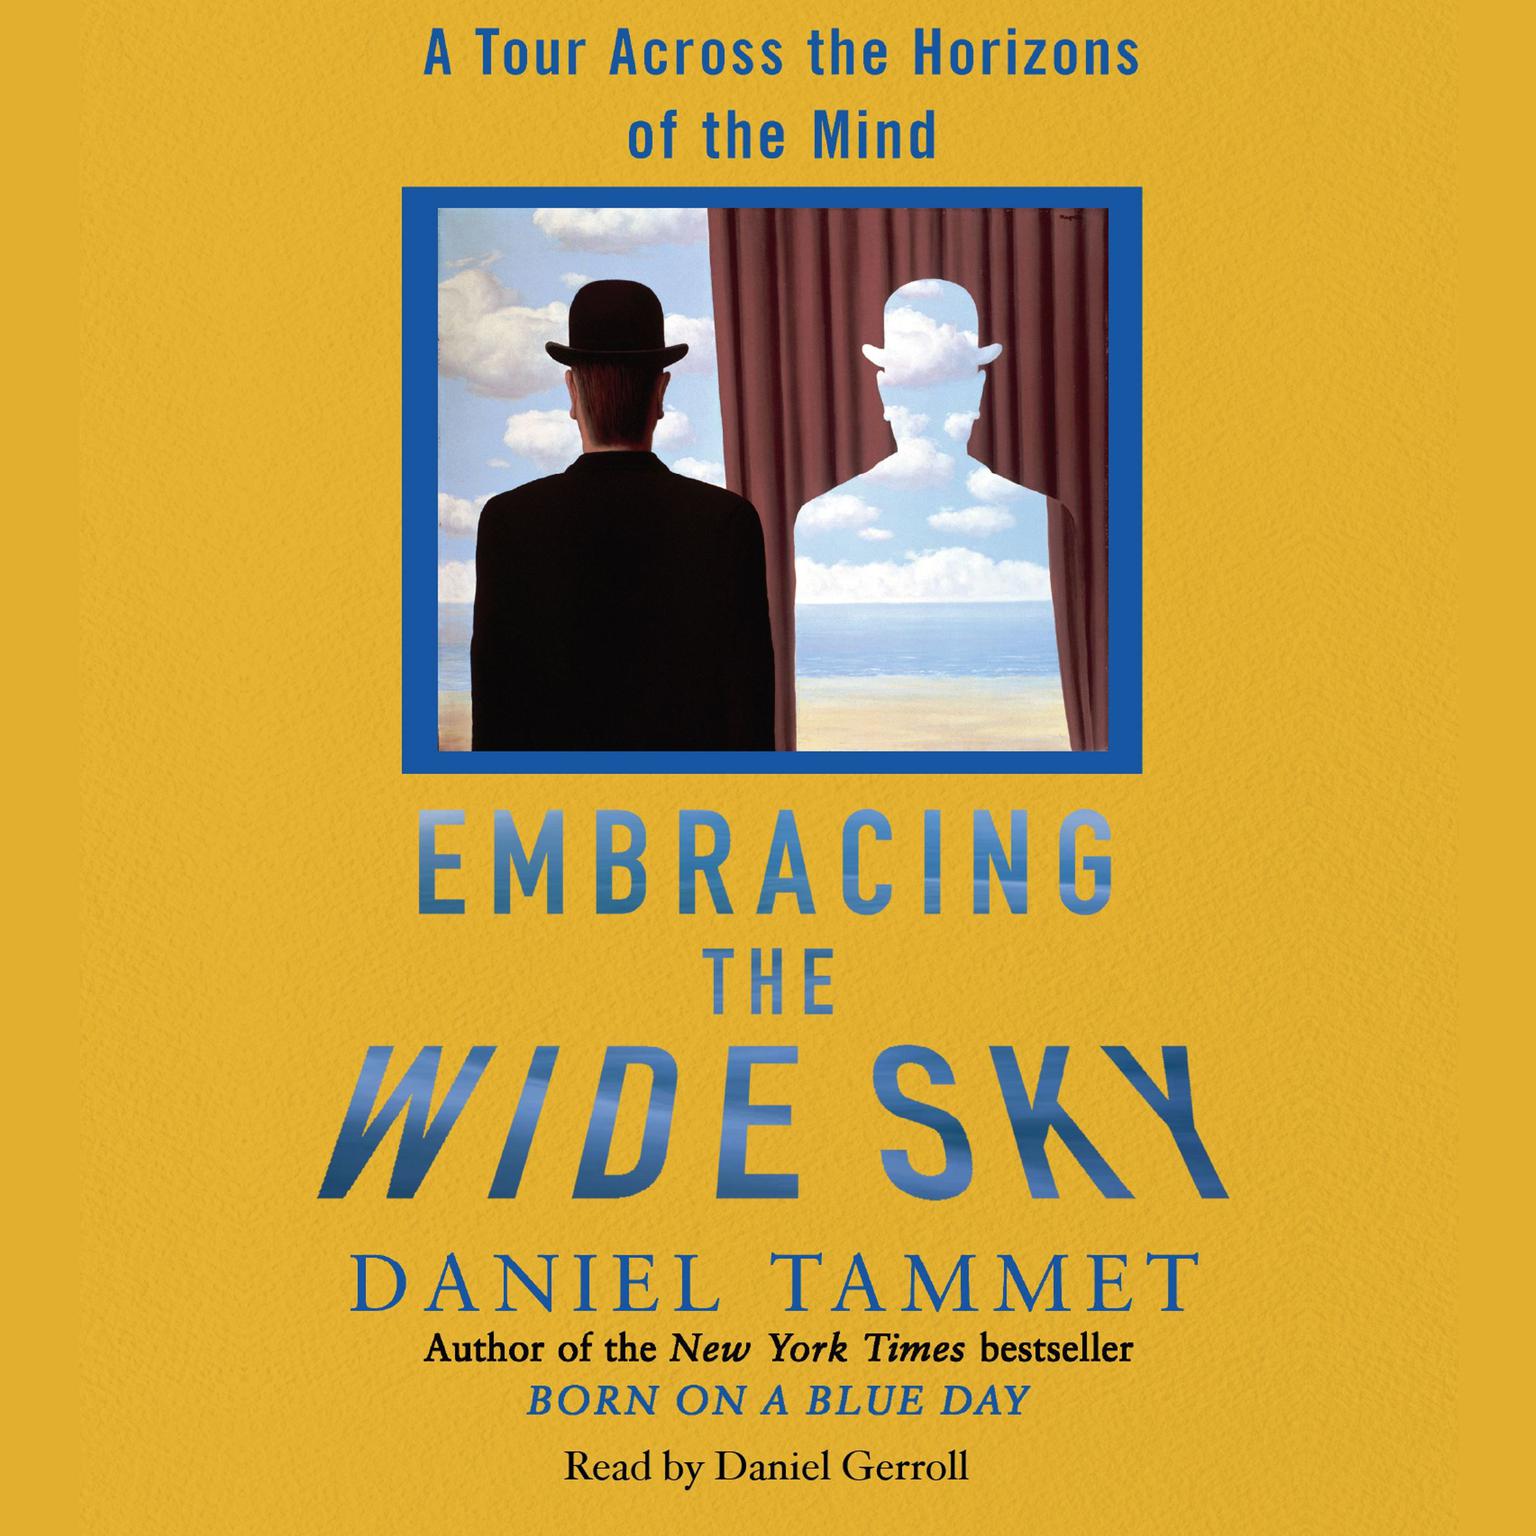 Embracing the Wide Sky (Abridged): A Tour Across the Horizons of the Mind Audiobook, by Daniel Tammet